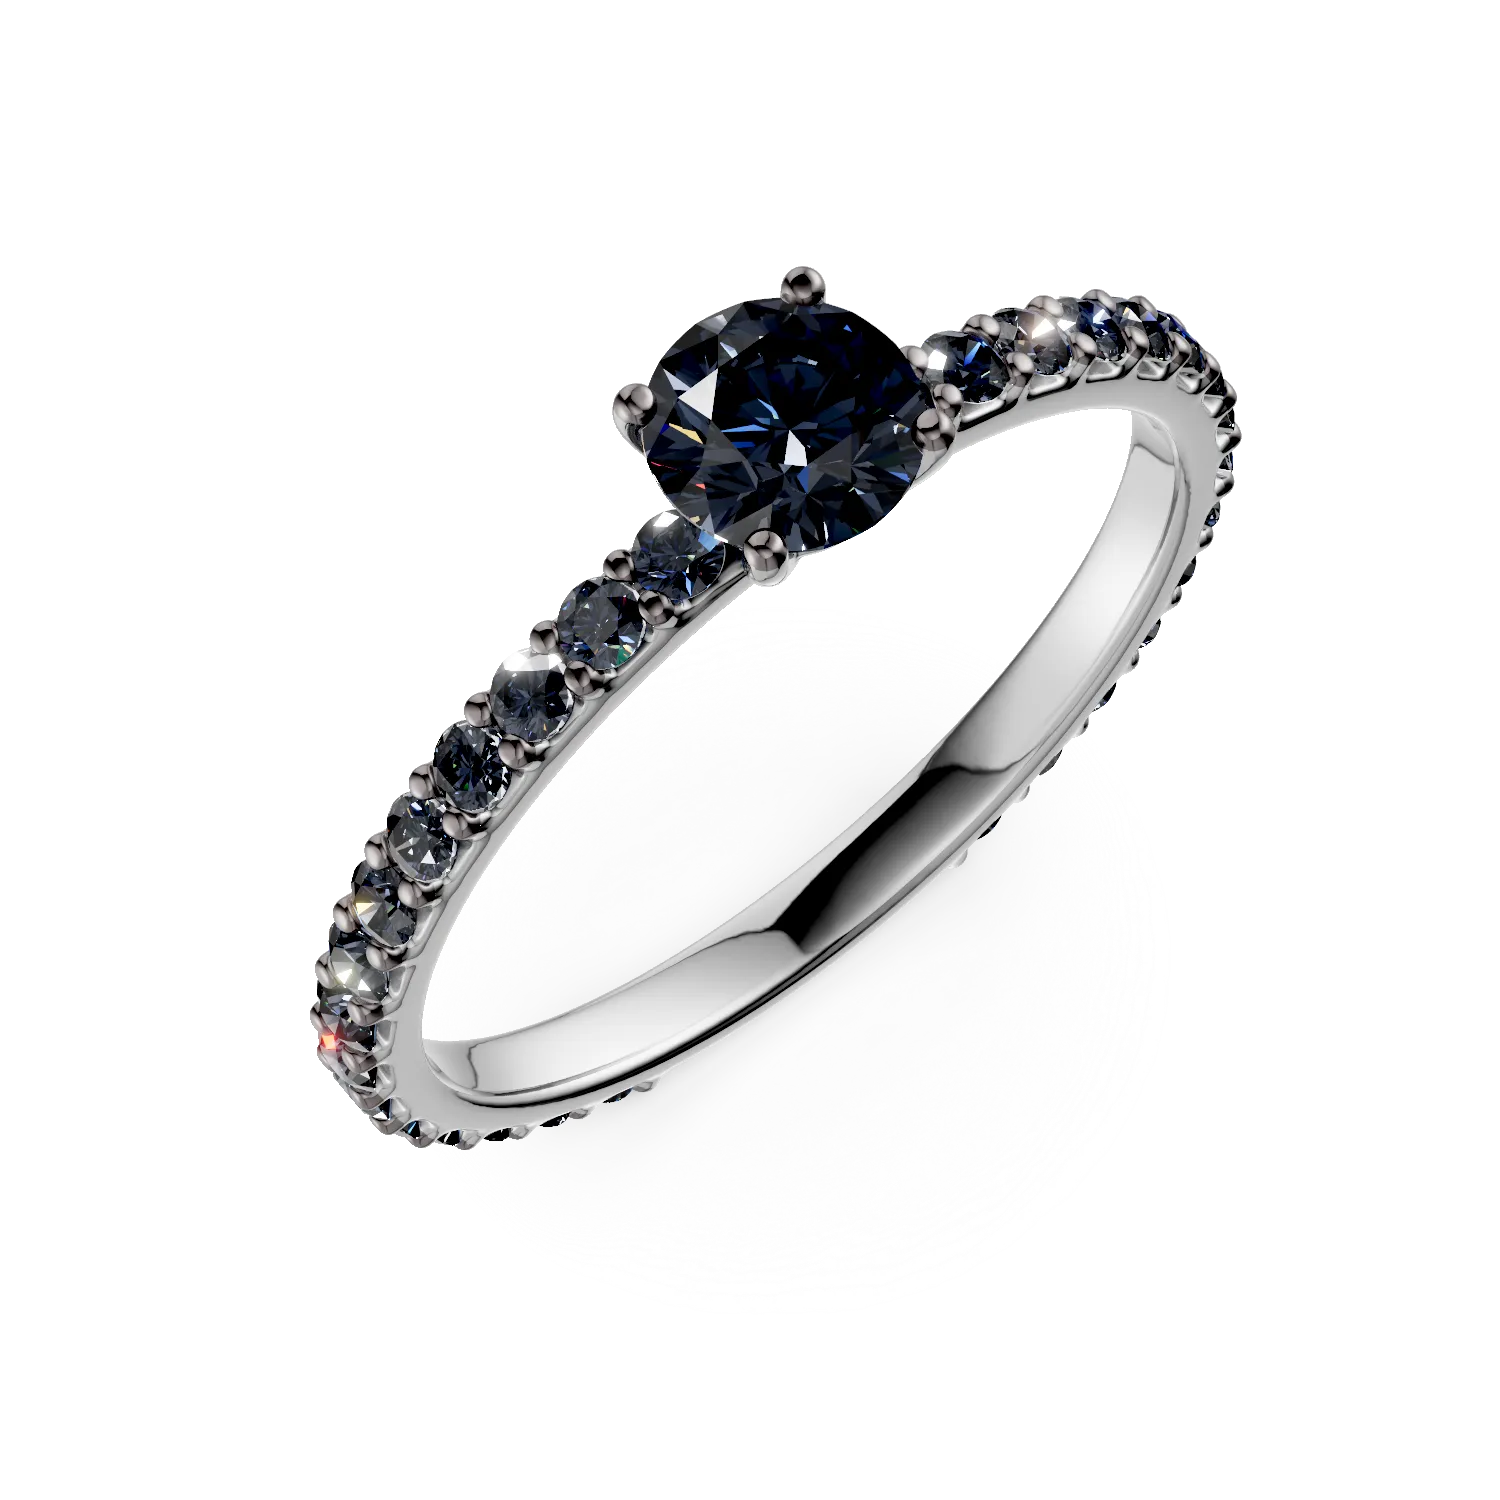 White gold engagement ring with 1.16ct sapphires